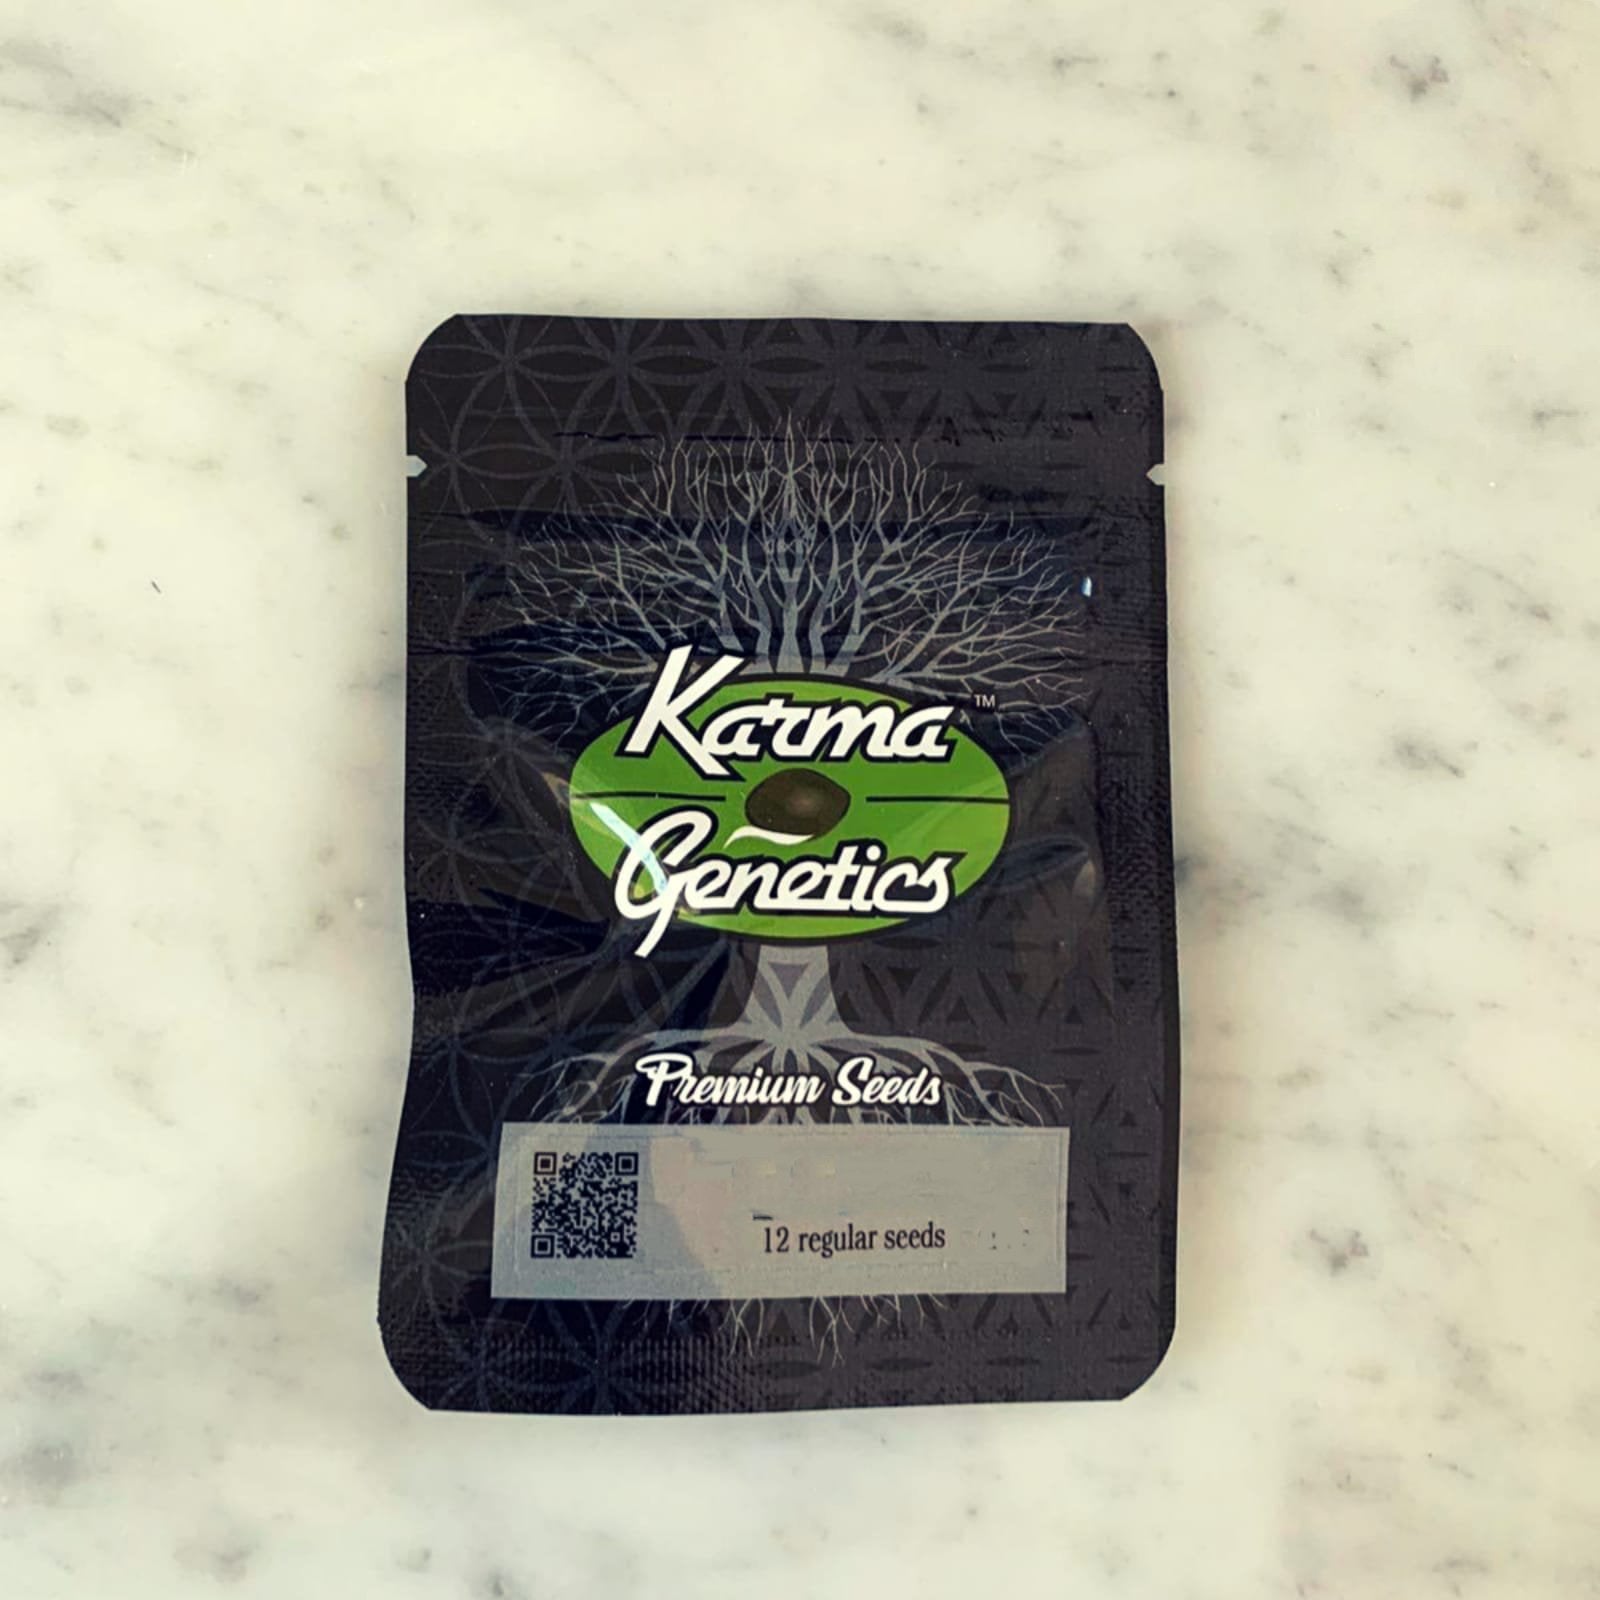 a packet of kroma genetics on a marble countertop